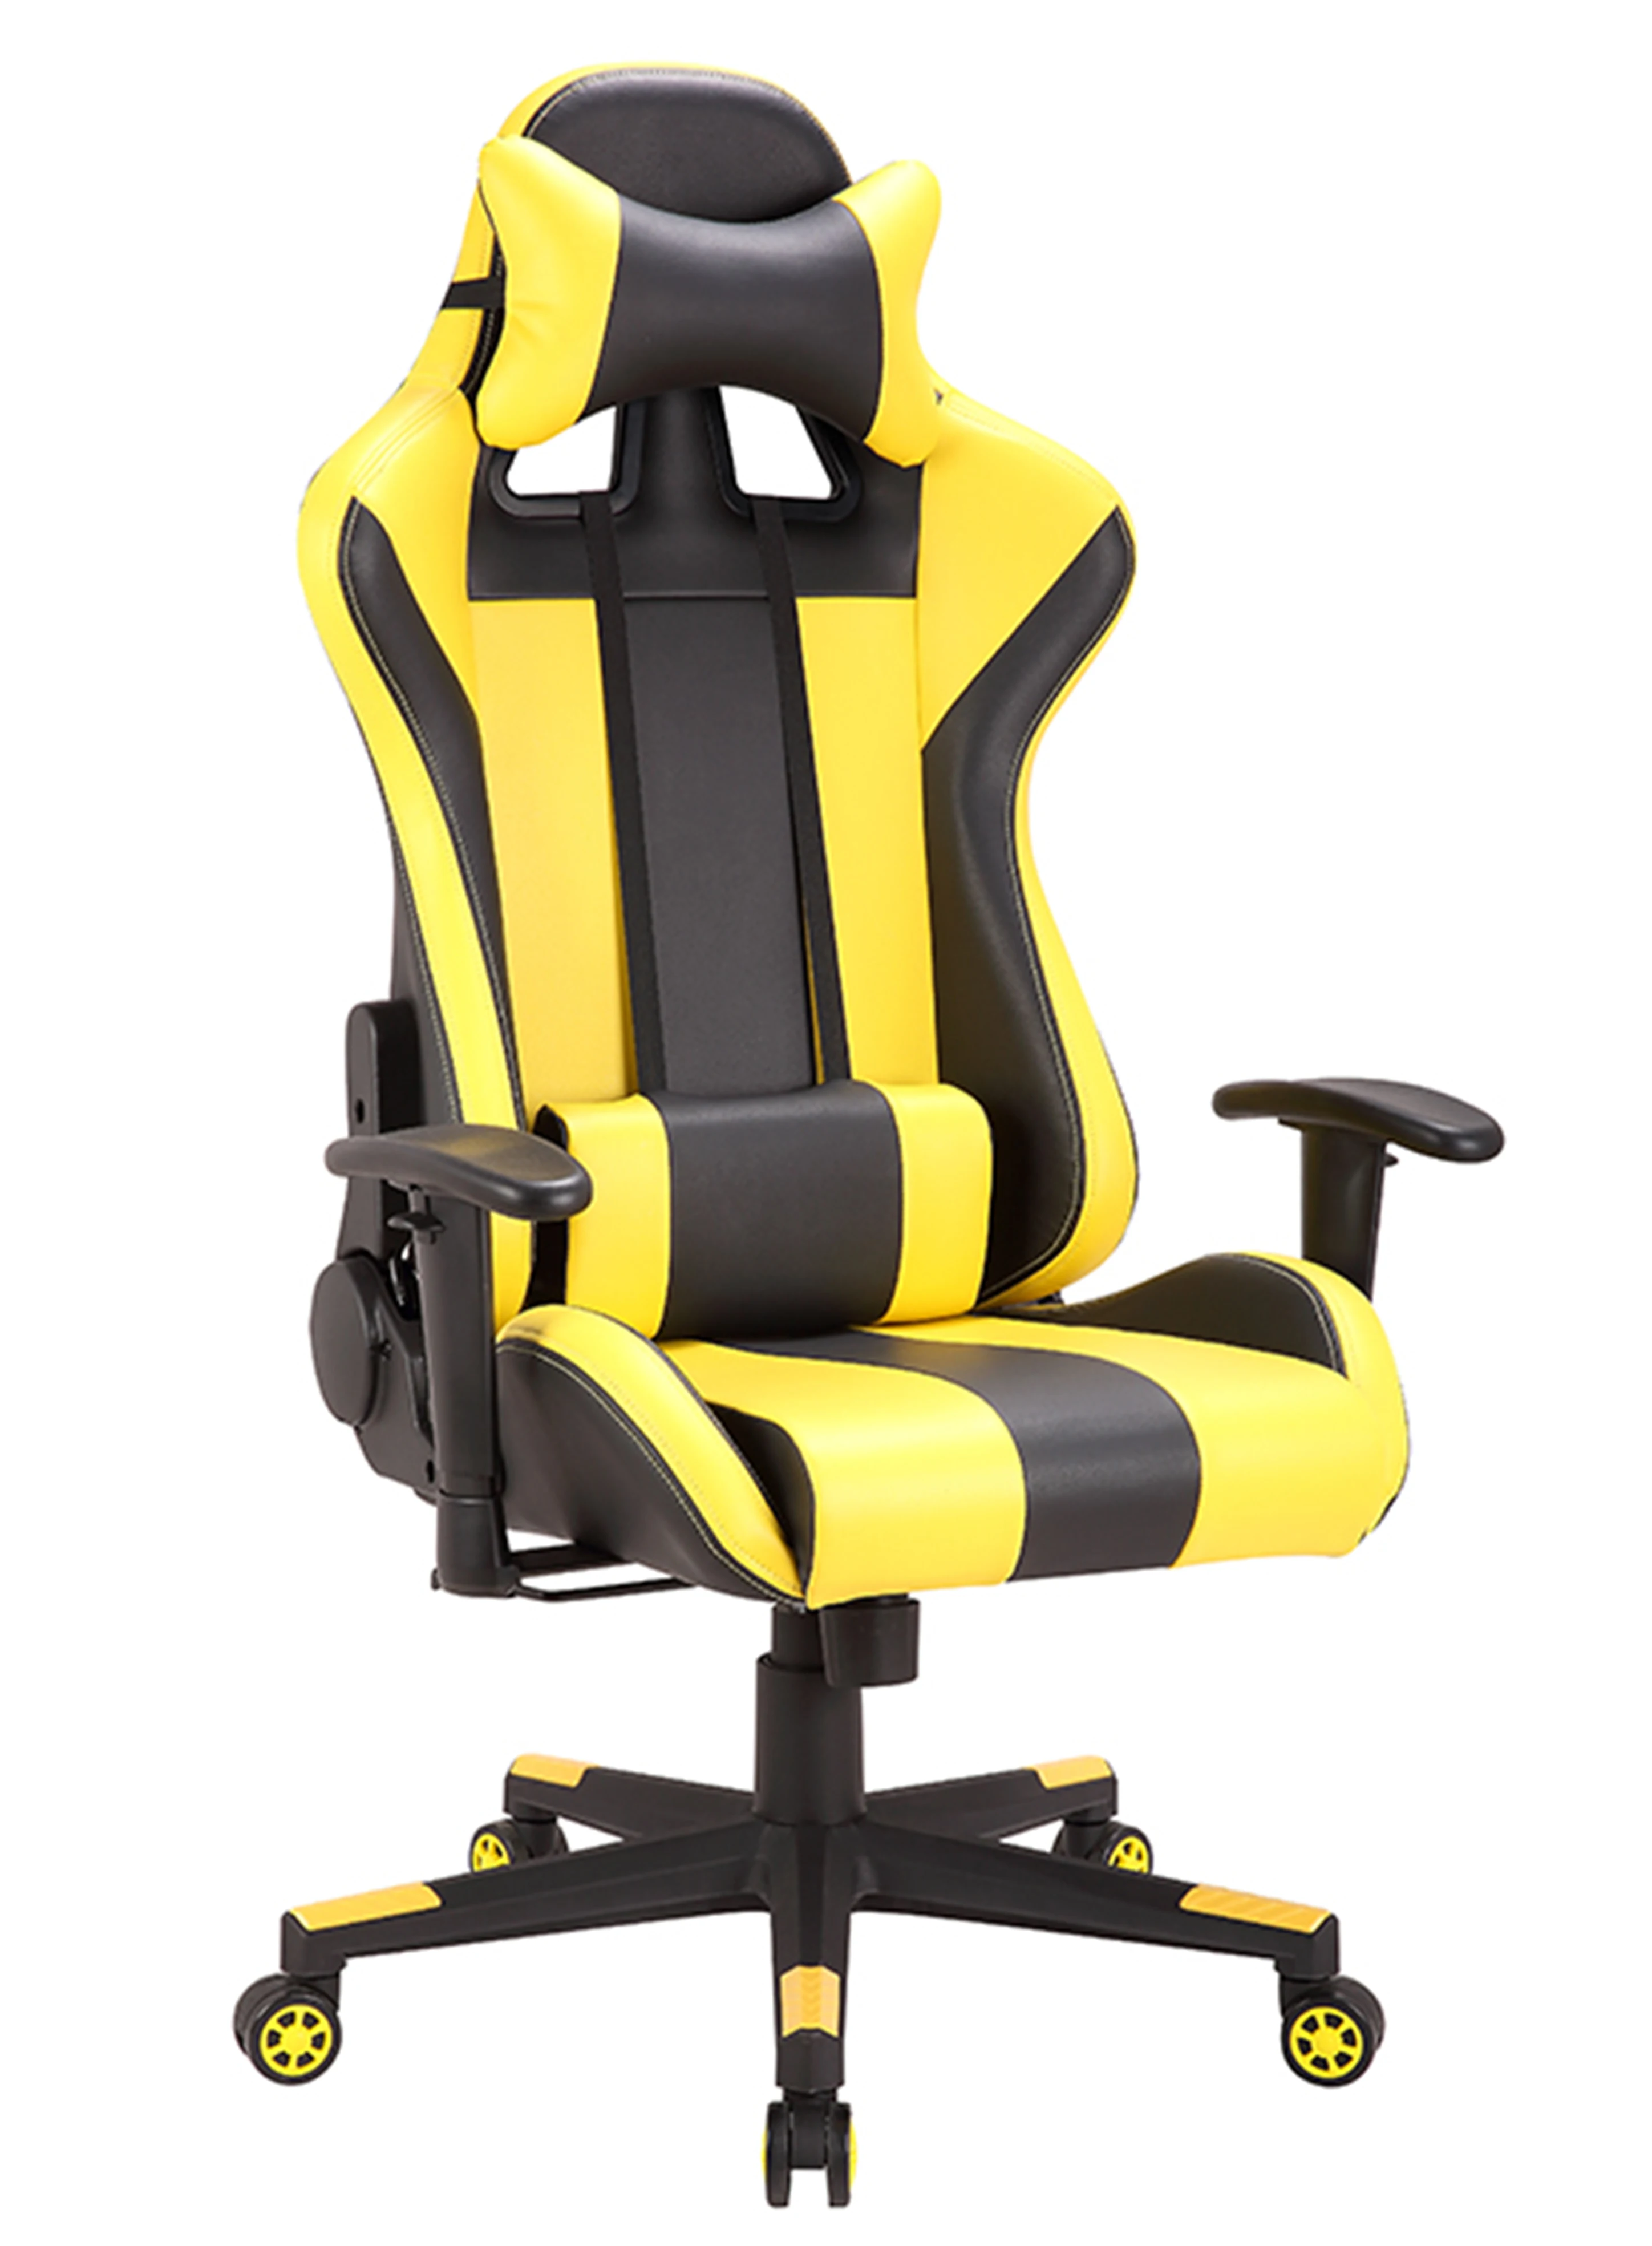 Gaming Chair Yellow And Black Gaming Chair Buy Gaming Chair Yellow And Black Gaming Chair Gaming Chairs Product On Alibaba Com